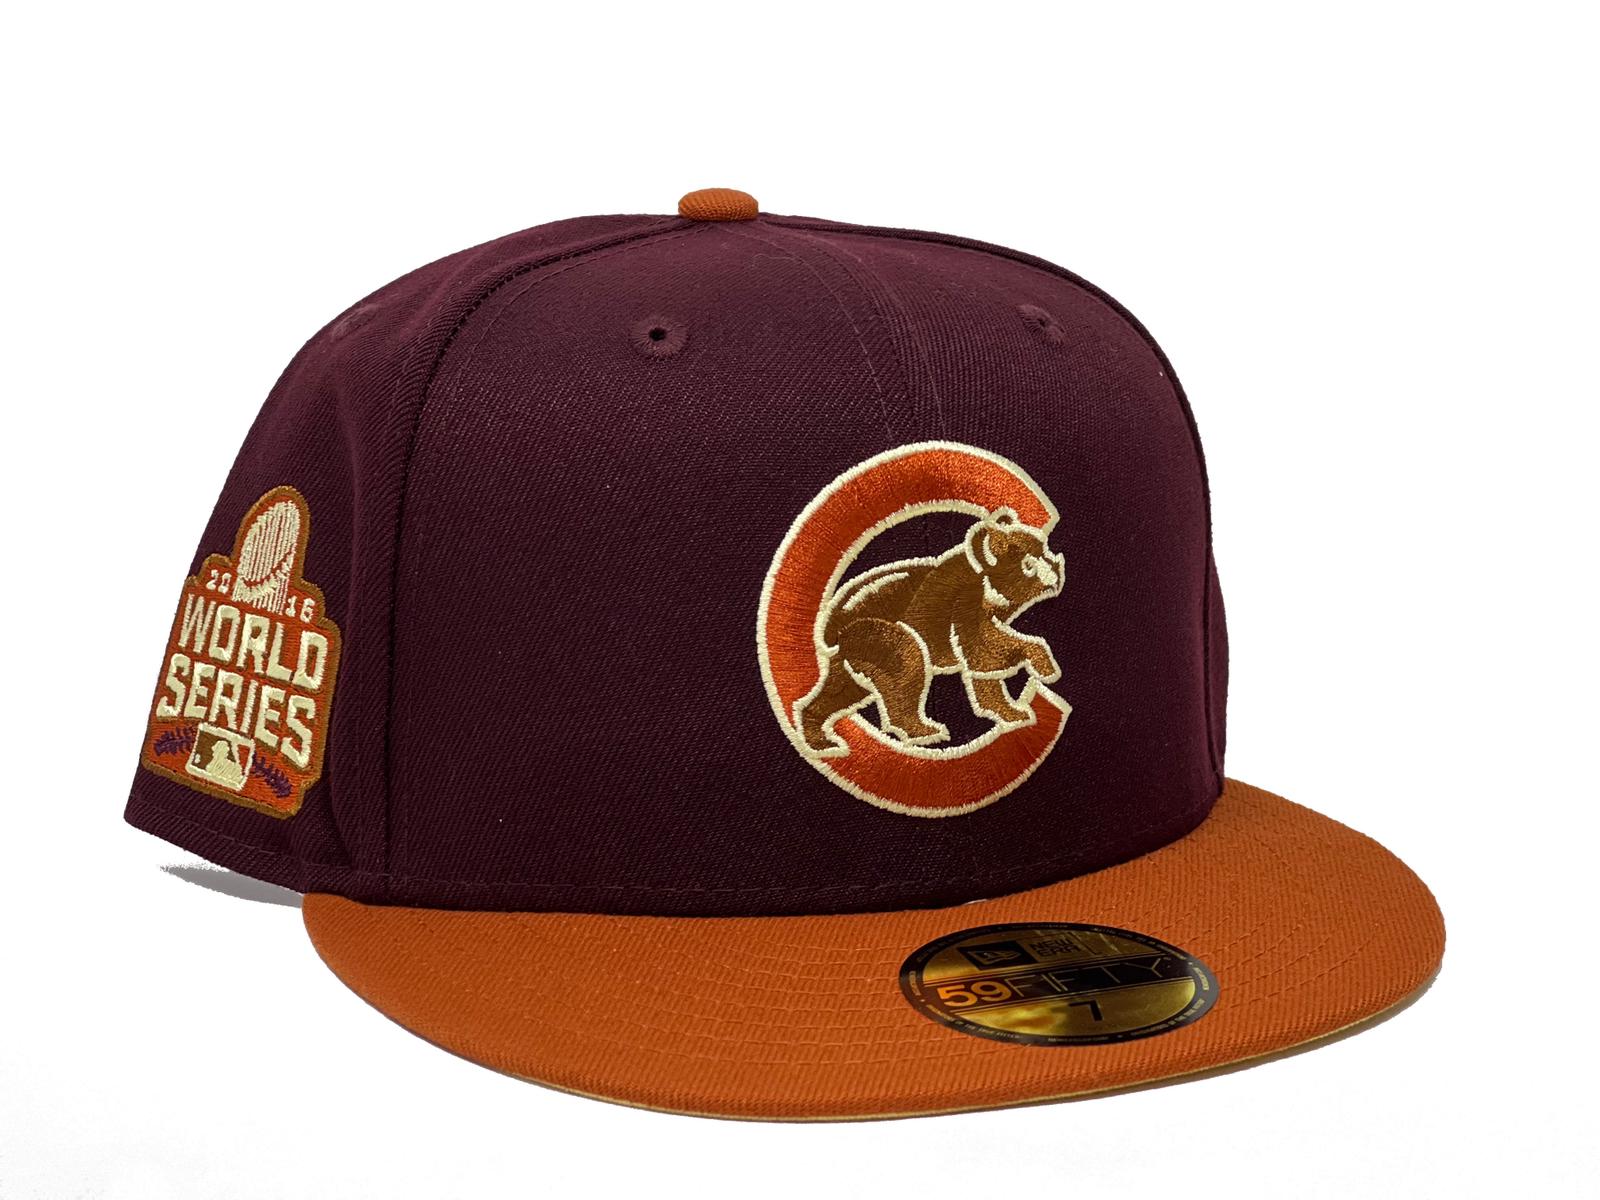 New @neweracap MLB fitted Chicago cubs 2Tone Gold and rust orange